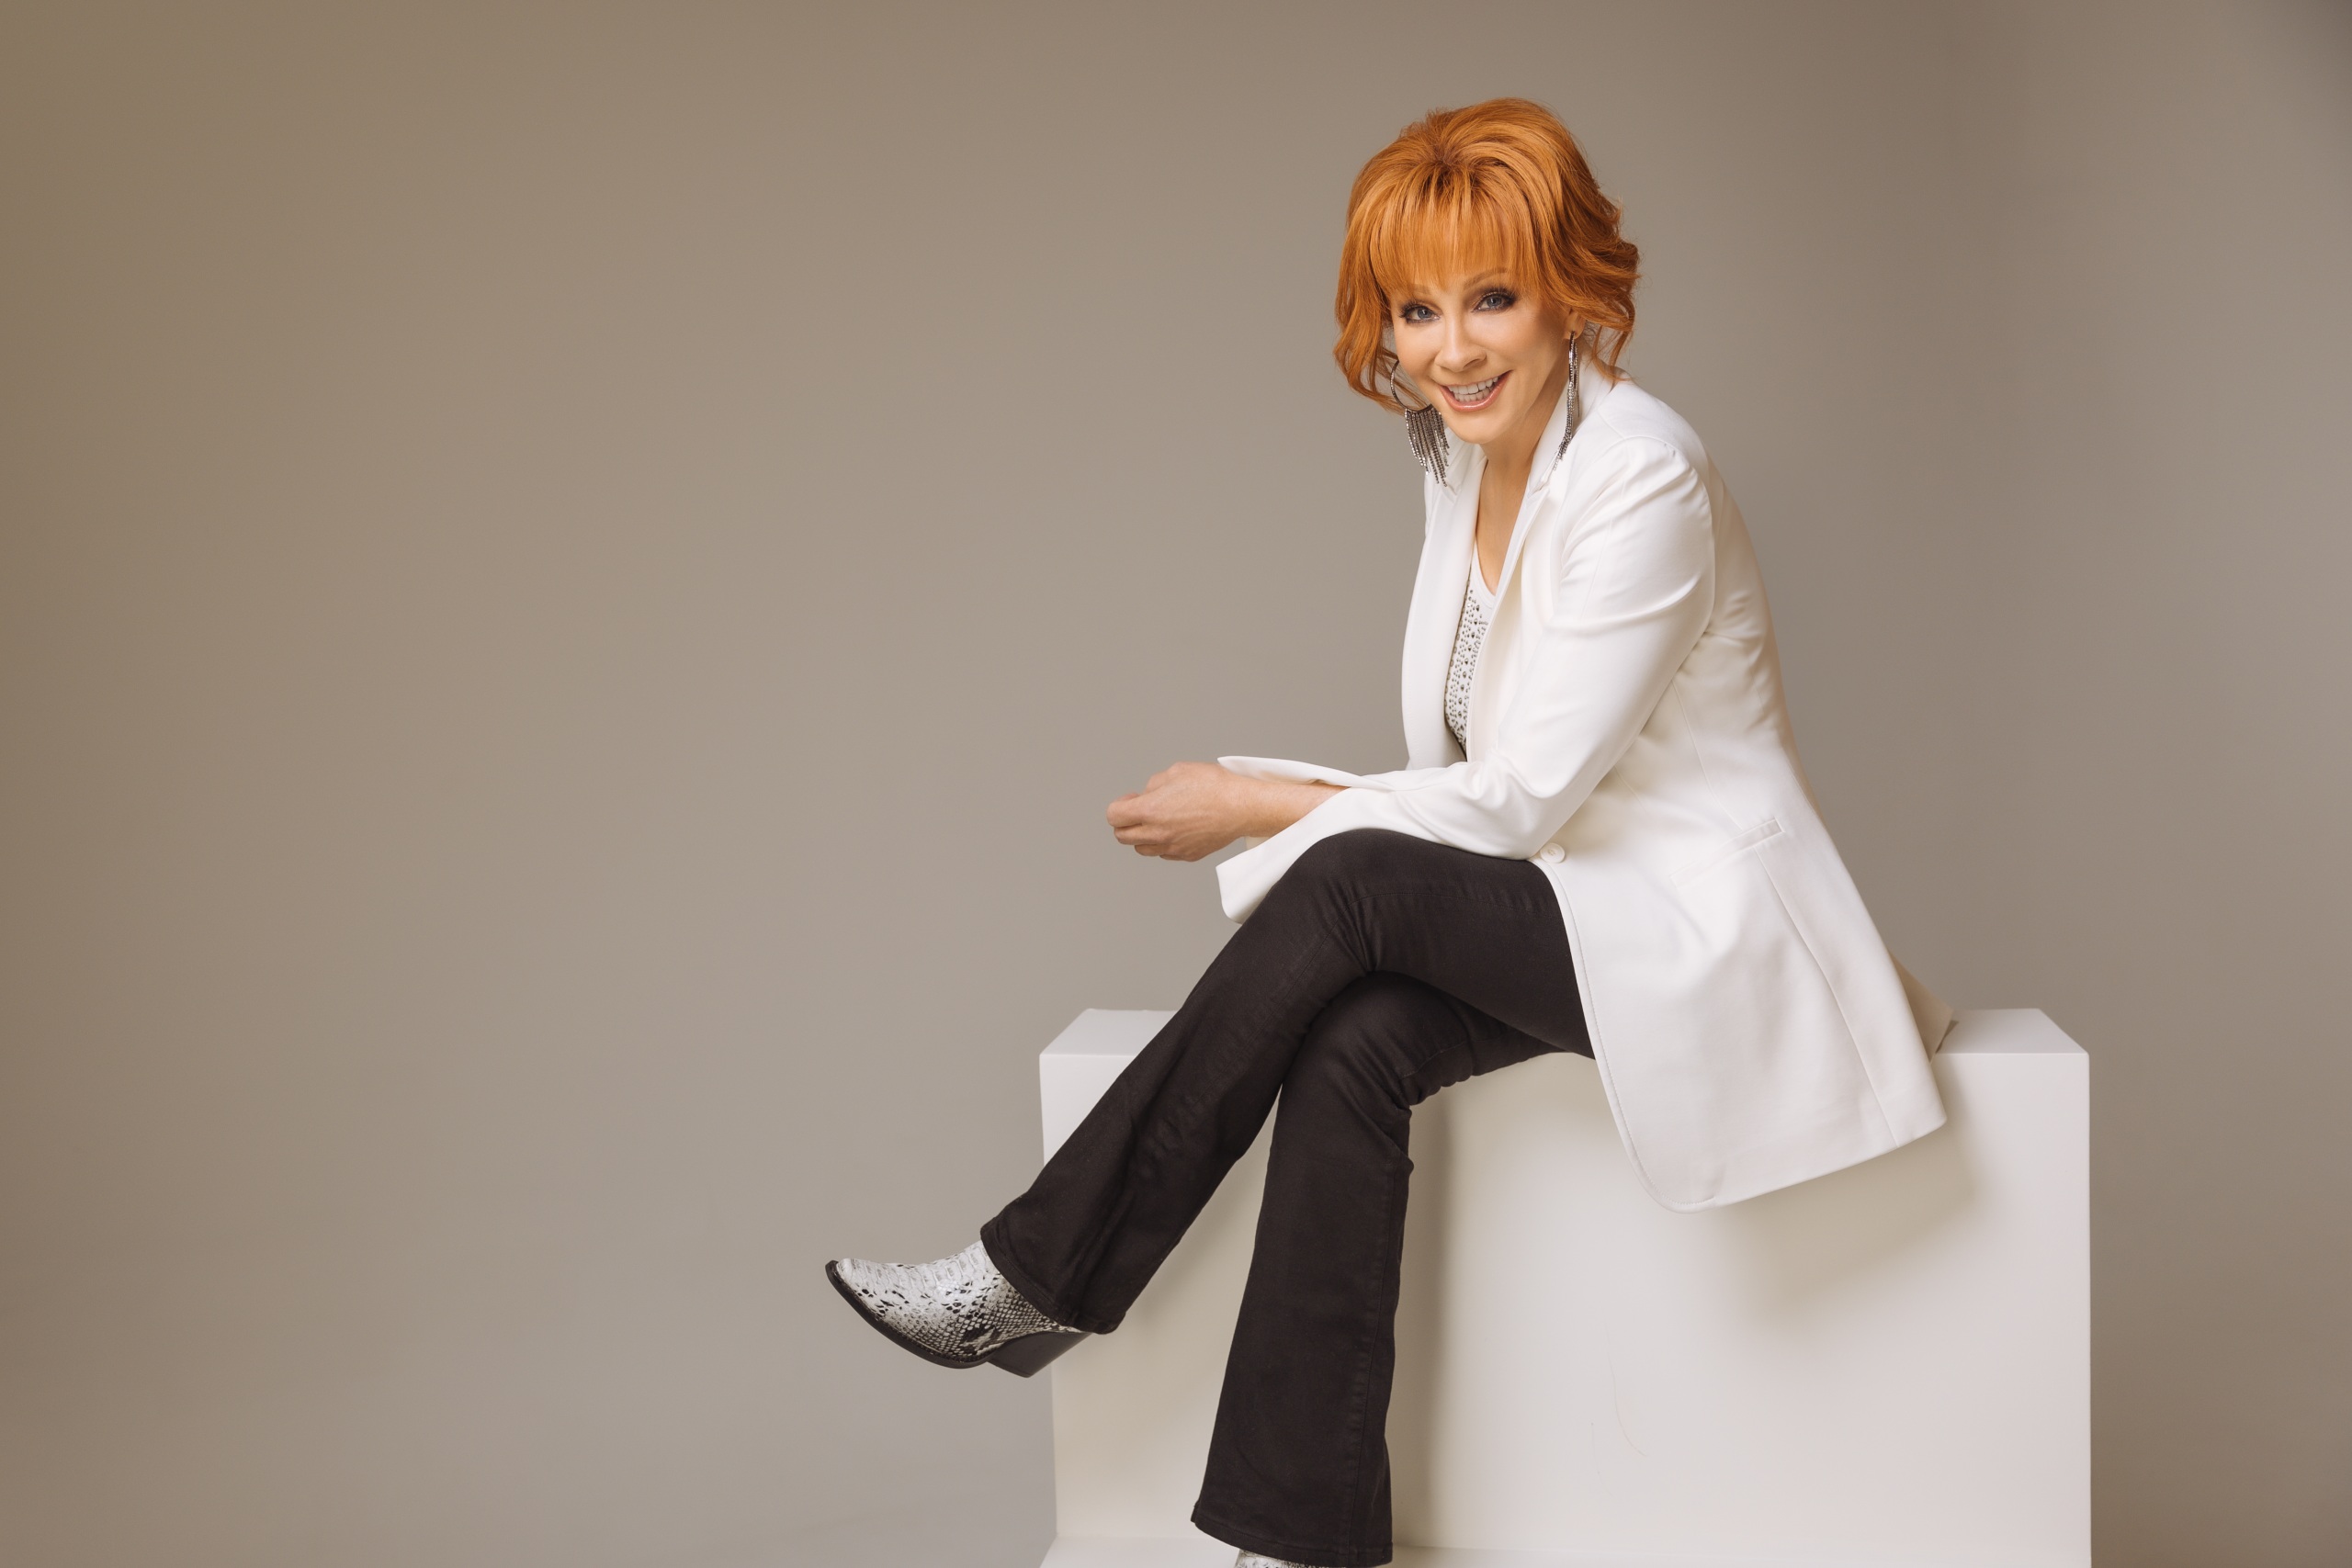 REBA McENTIRE SAYS “I CAN” TO THE SONG “I CAN’T.”